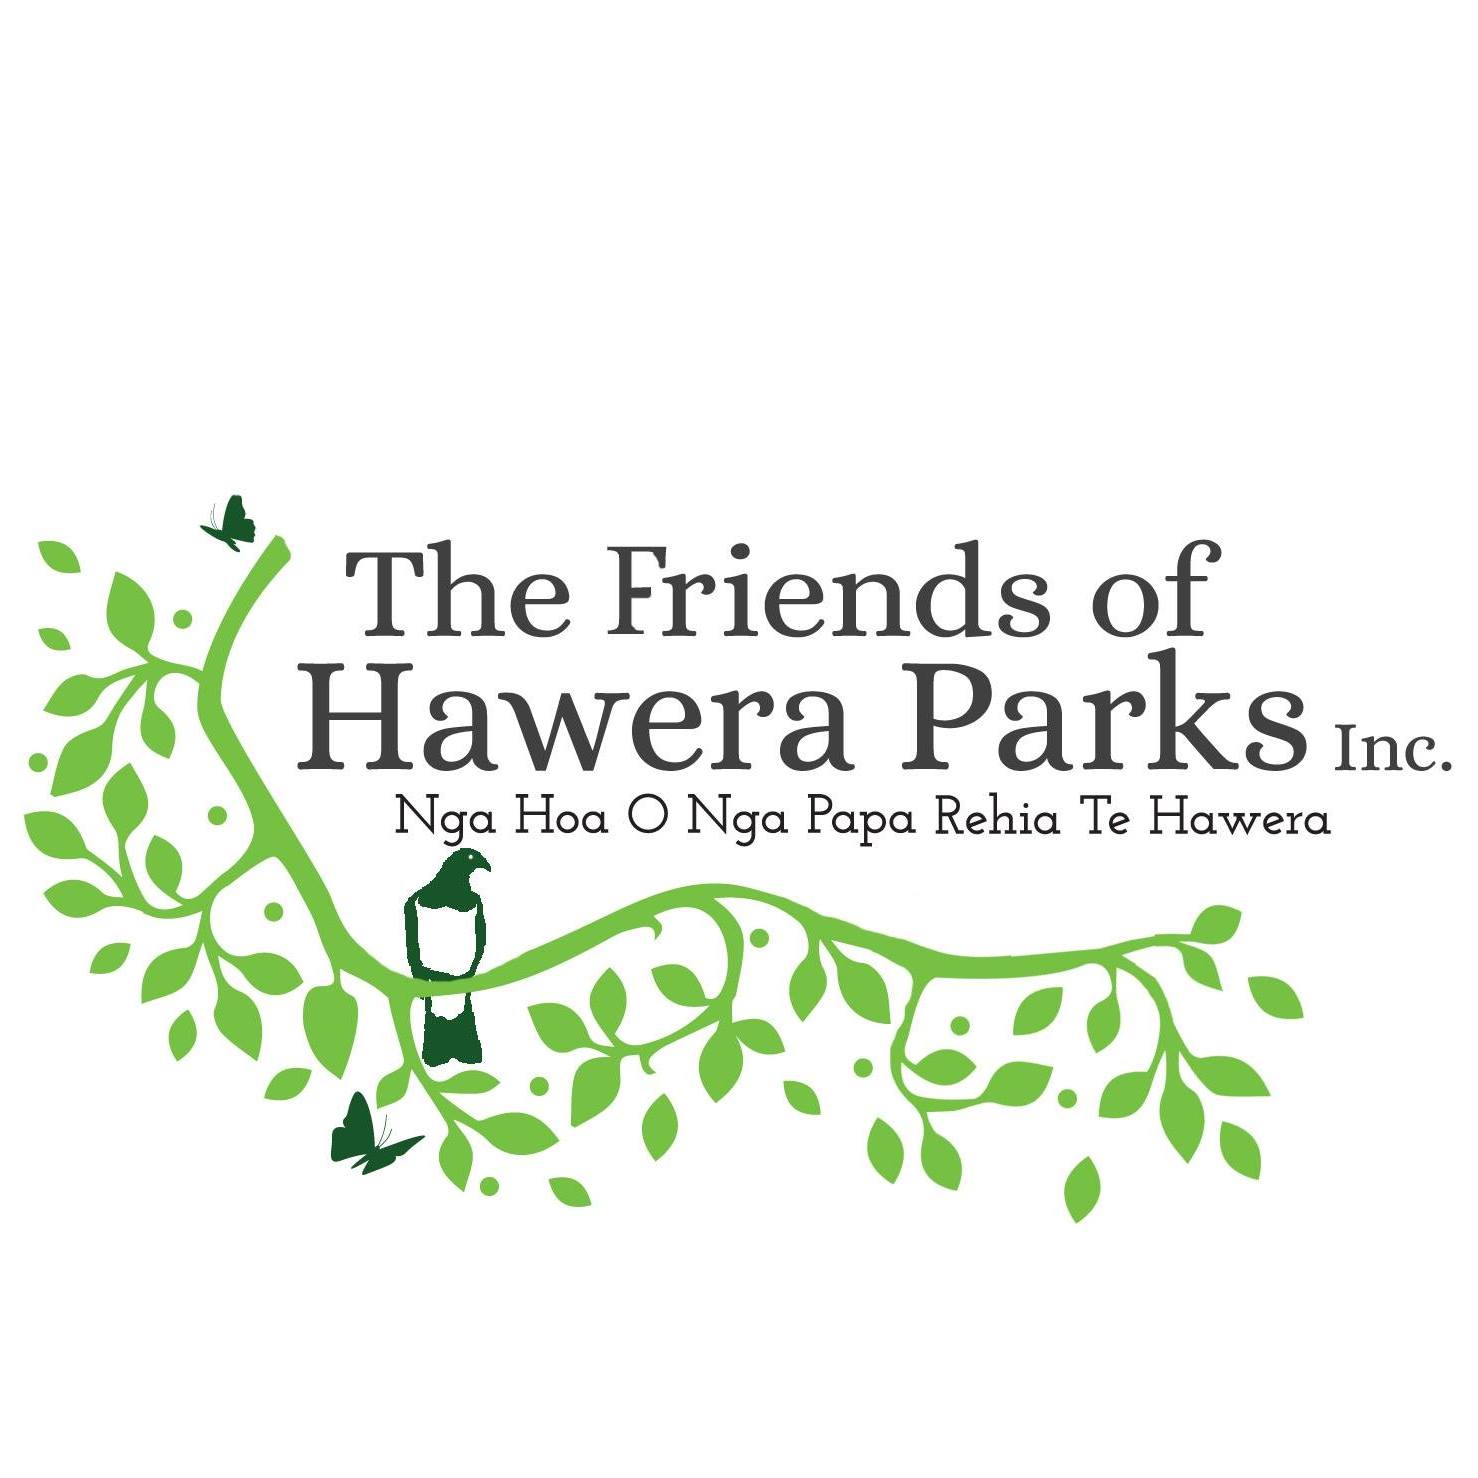 The Friends of Hawera Parks @The Friends of Hawera Parks Inc.﻿